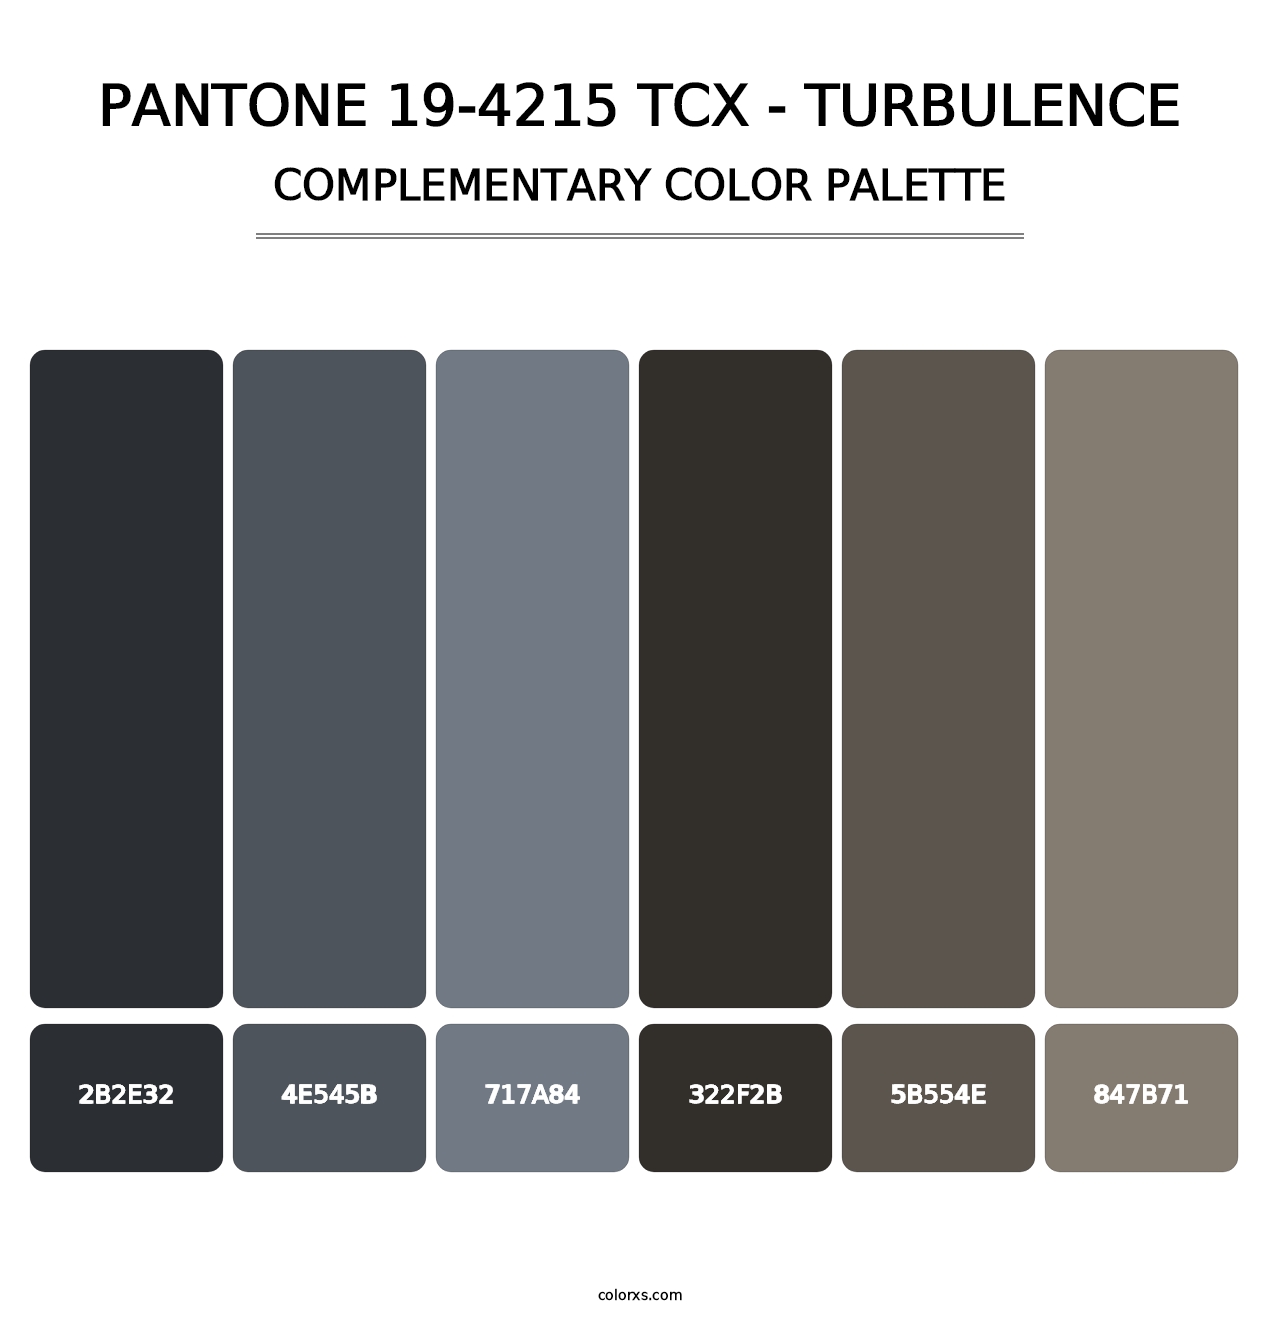 PANTONE 19-4215 TCX - Turbulence - Complementary Color Palette